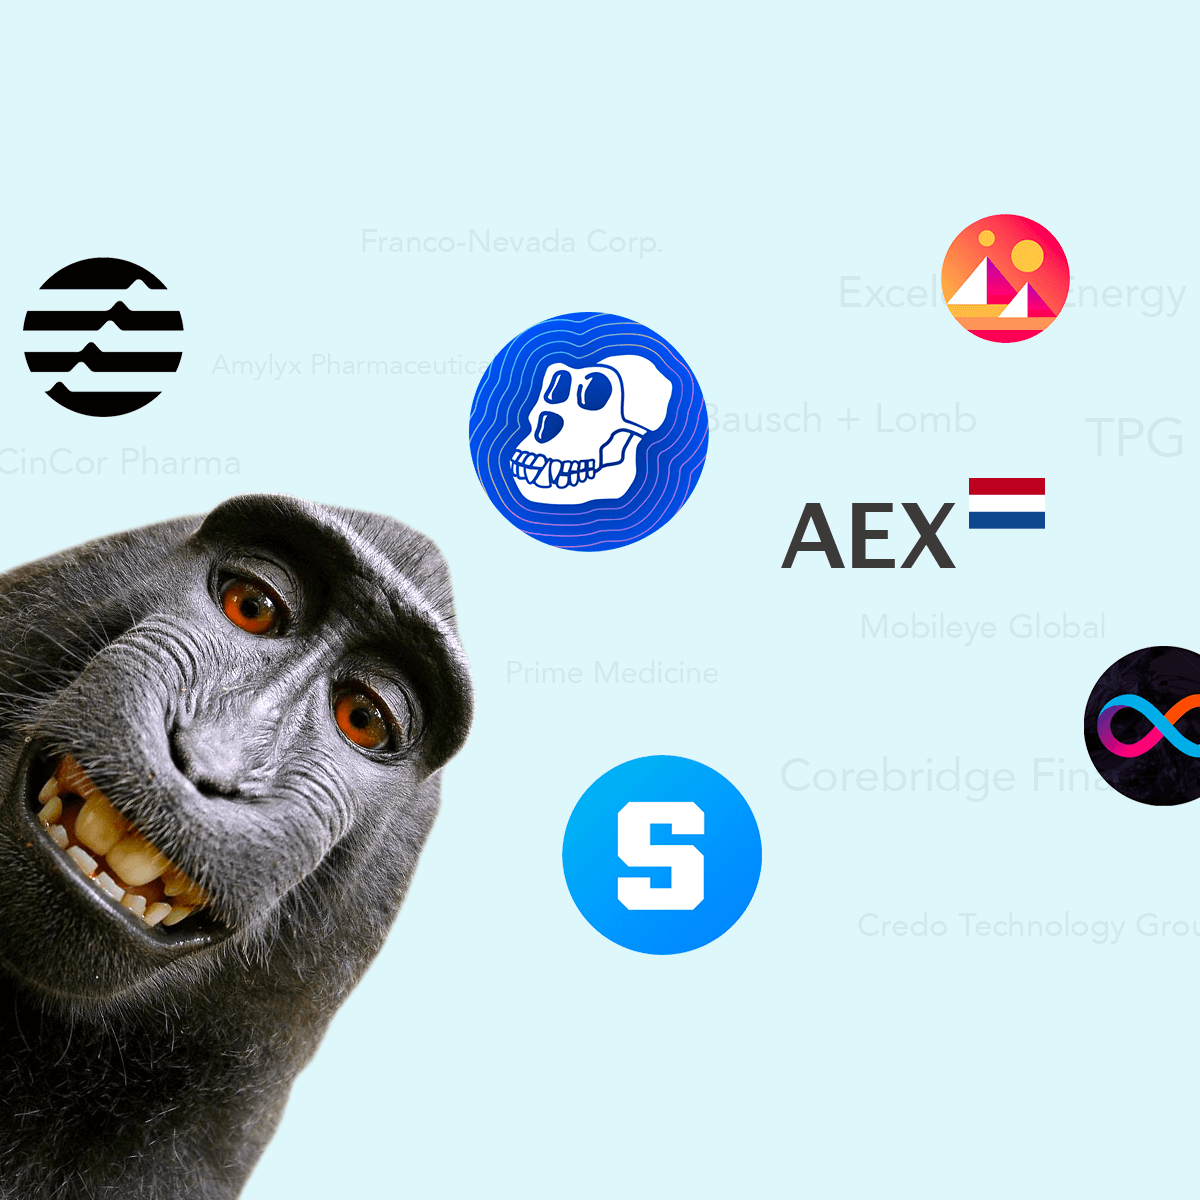 New markets on Morpher with company logos of APE, MANA, Sandbox, TPG and a smiling monkey.